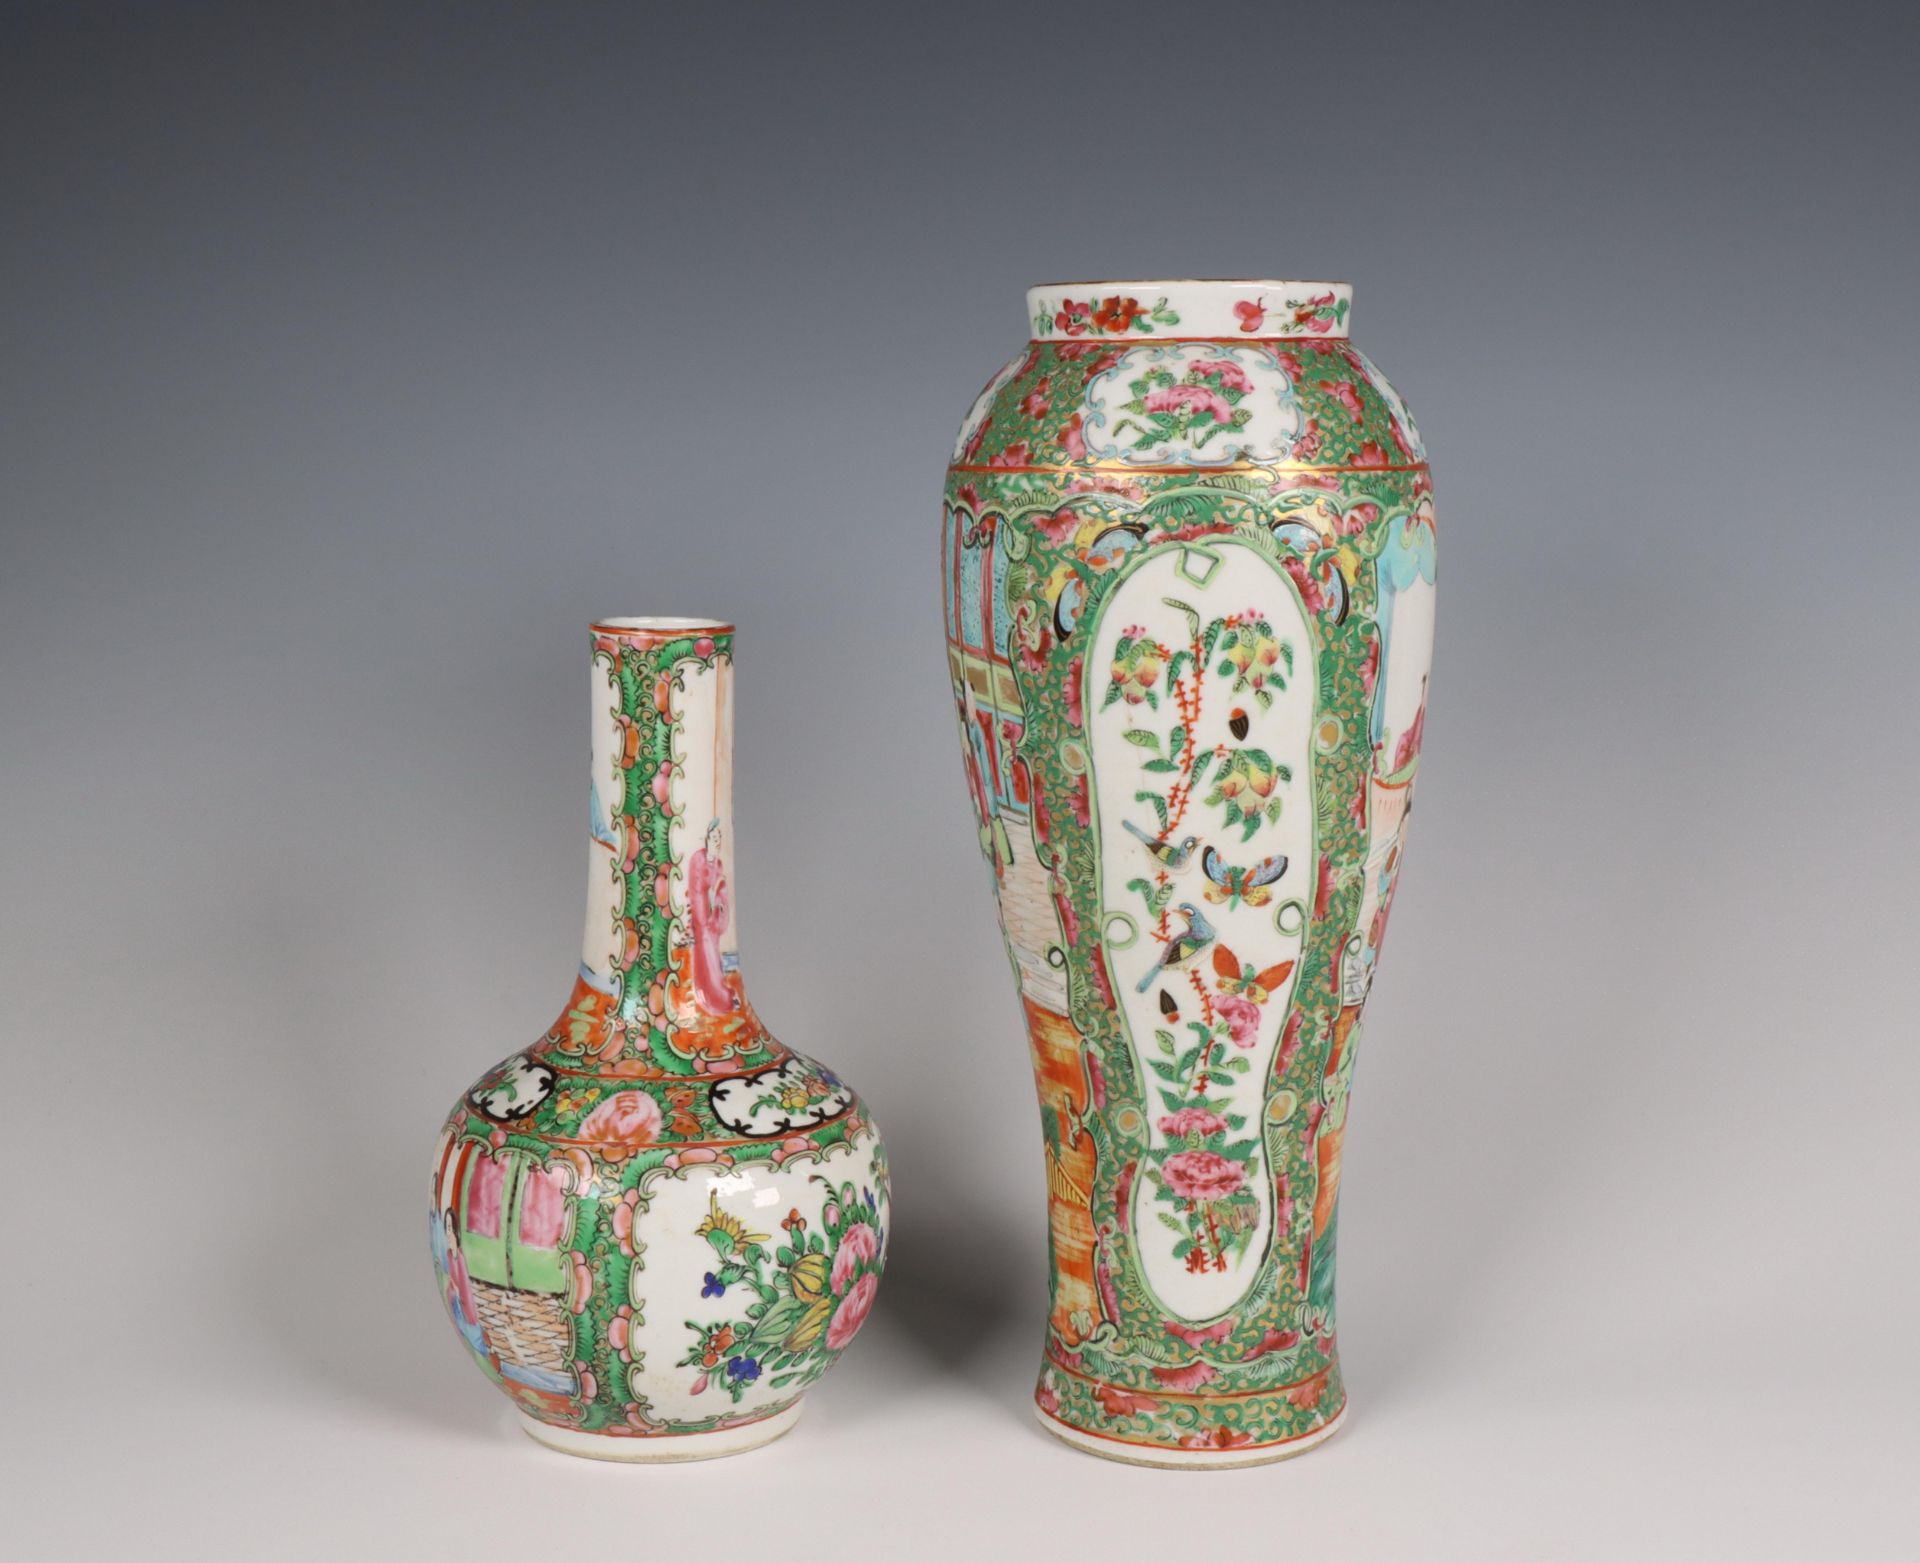 China, two Canton famille rose porcelain vases, 19th century, - Image 3 of 6